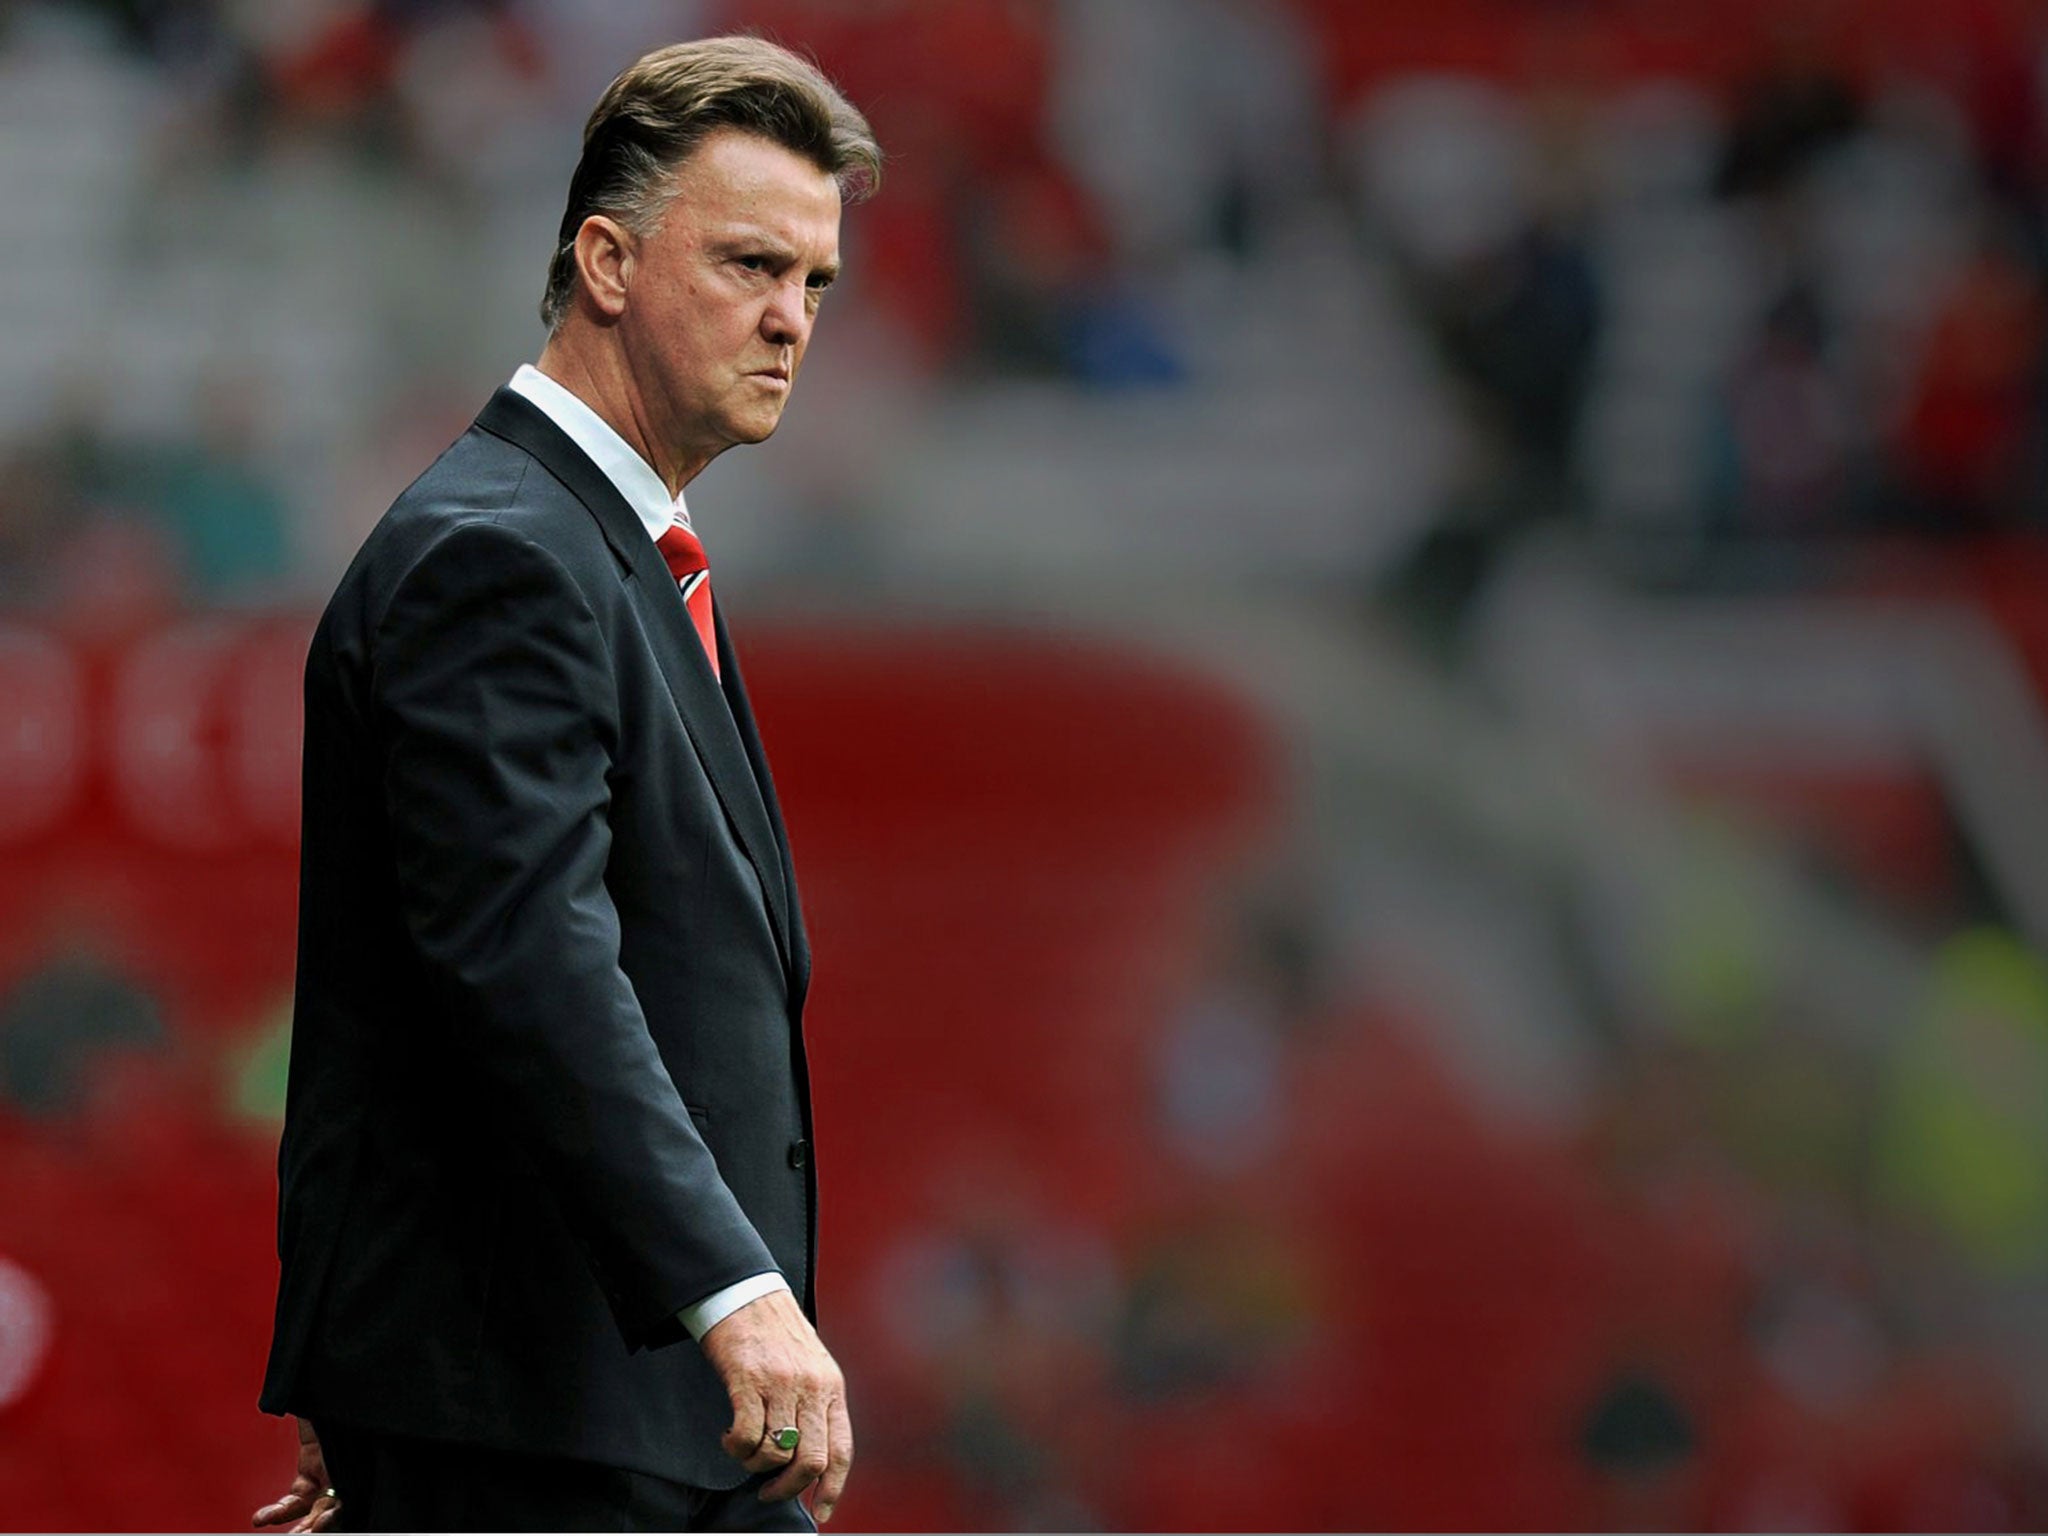 Louis van Gaal watches on from the sidelines